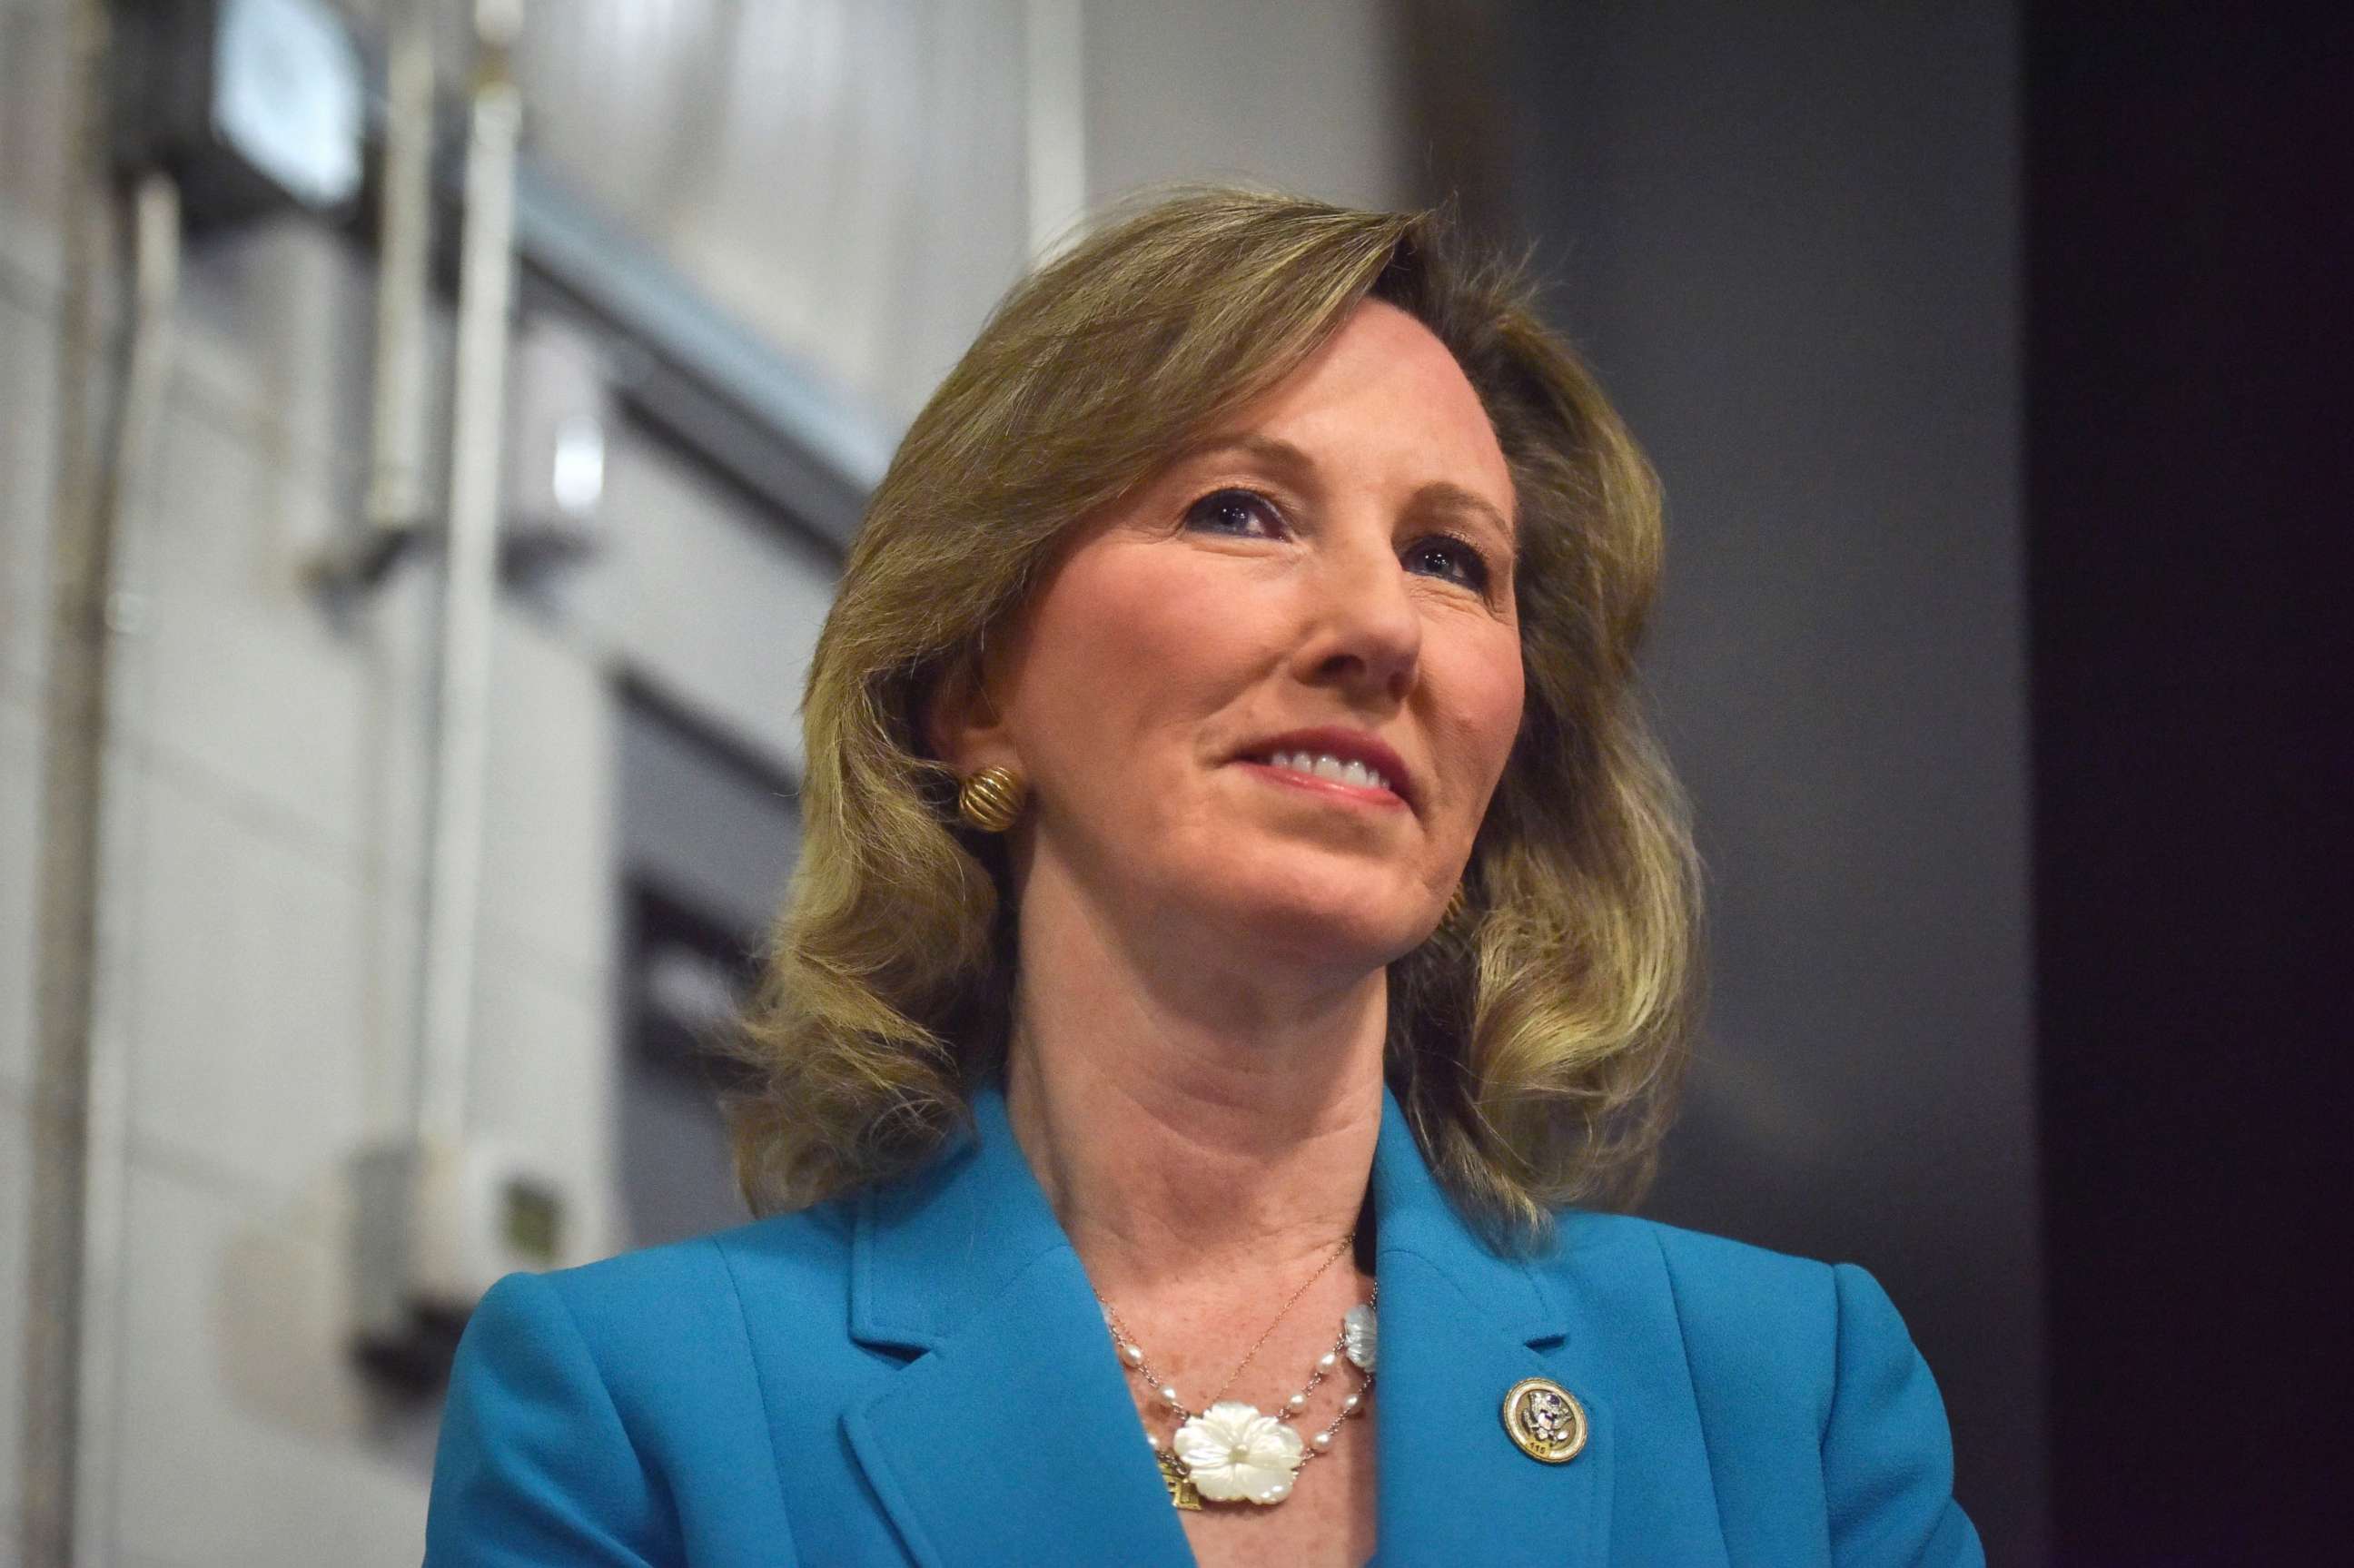 PHOTO: Rep. Barbara Comstock attends a rally, Oct. 30, 2017, in Sterling, Va.